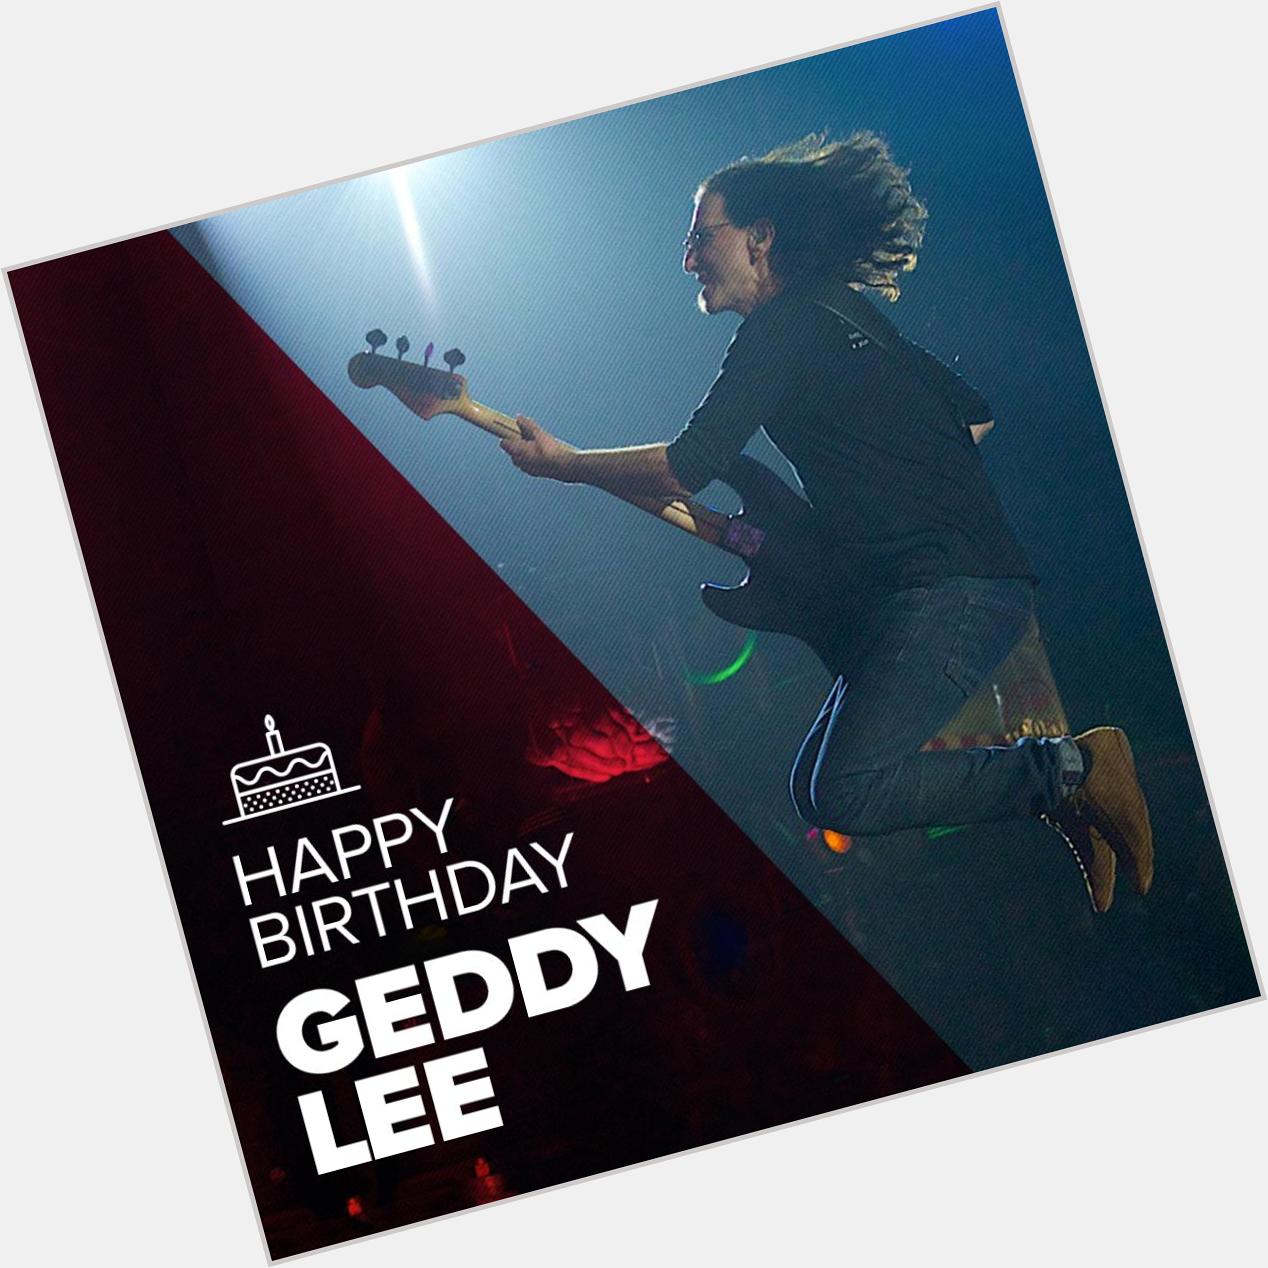 Join us in wishing a Happy Birthday to the incomparable Geddy Lee. 